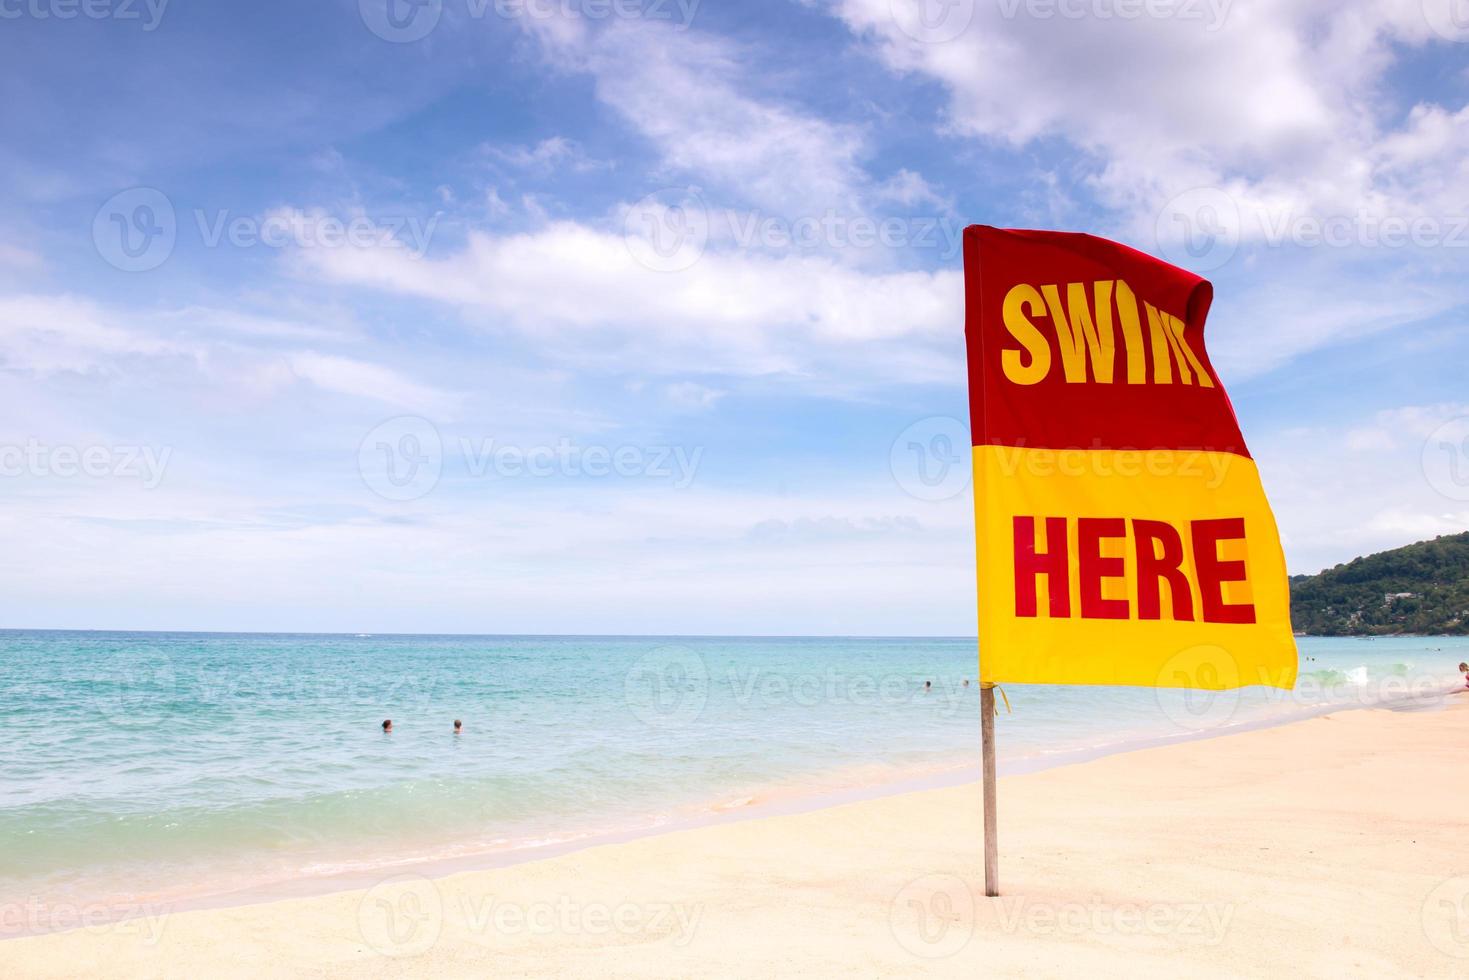 swimming here sign on the beach photo